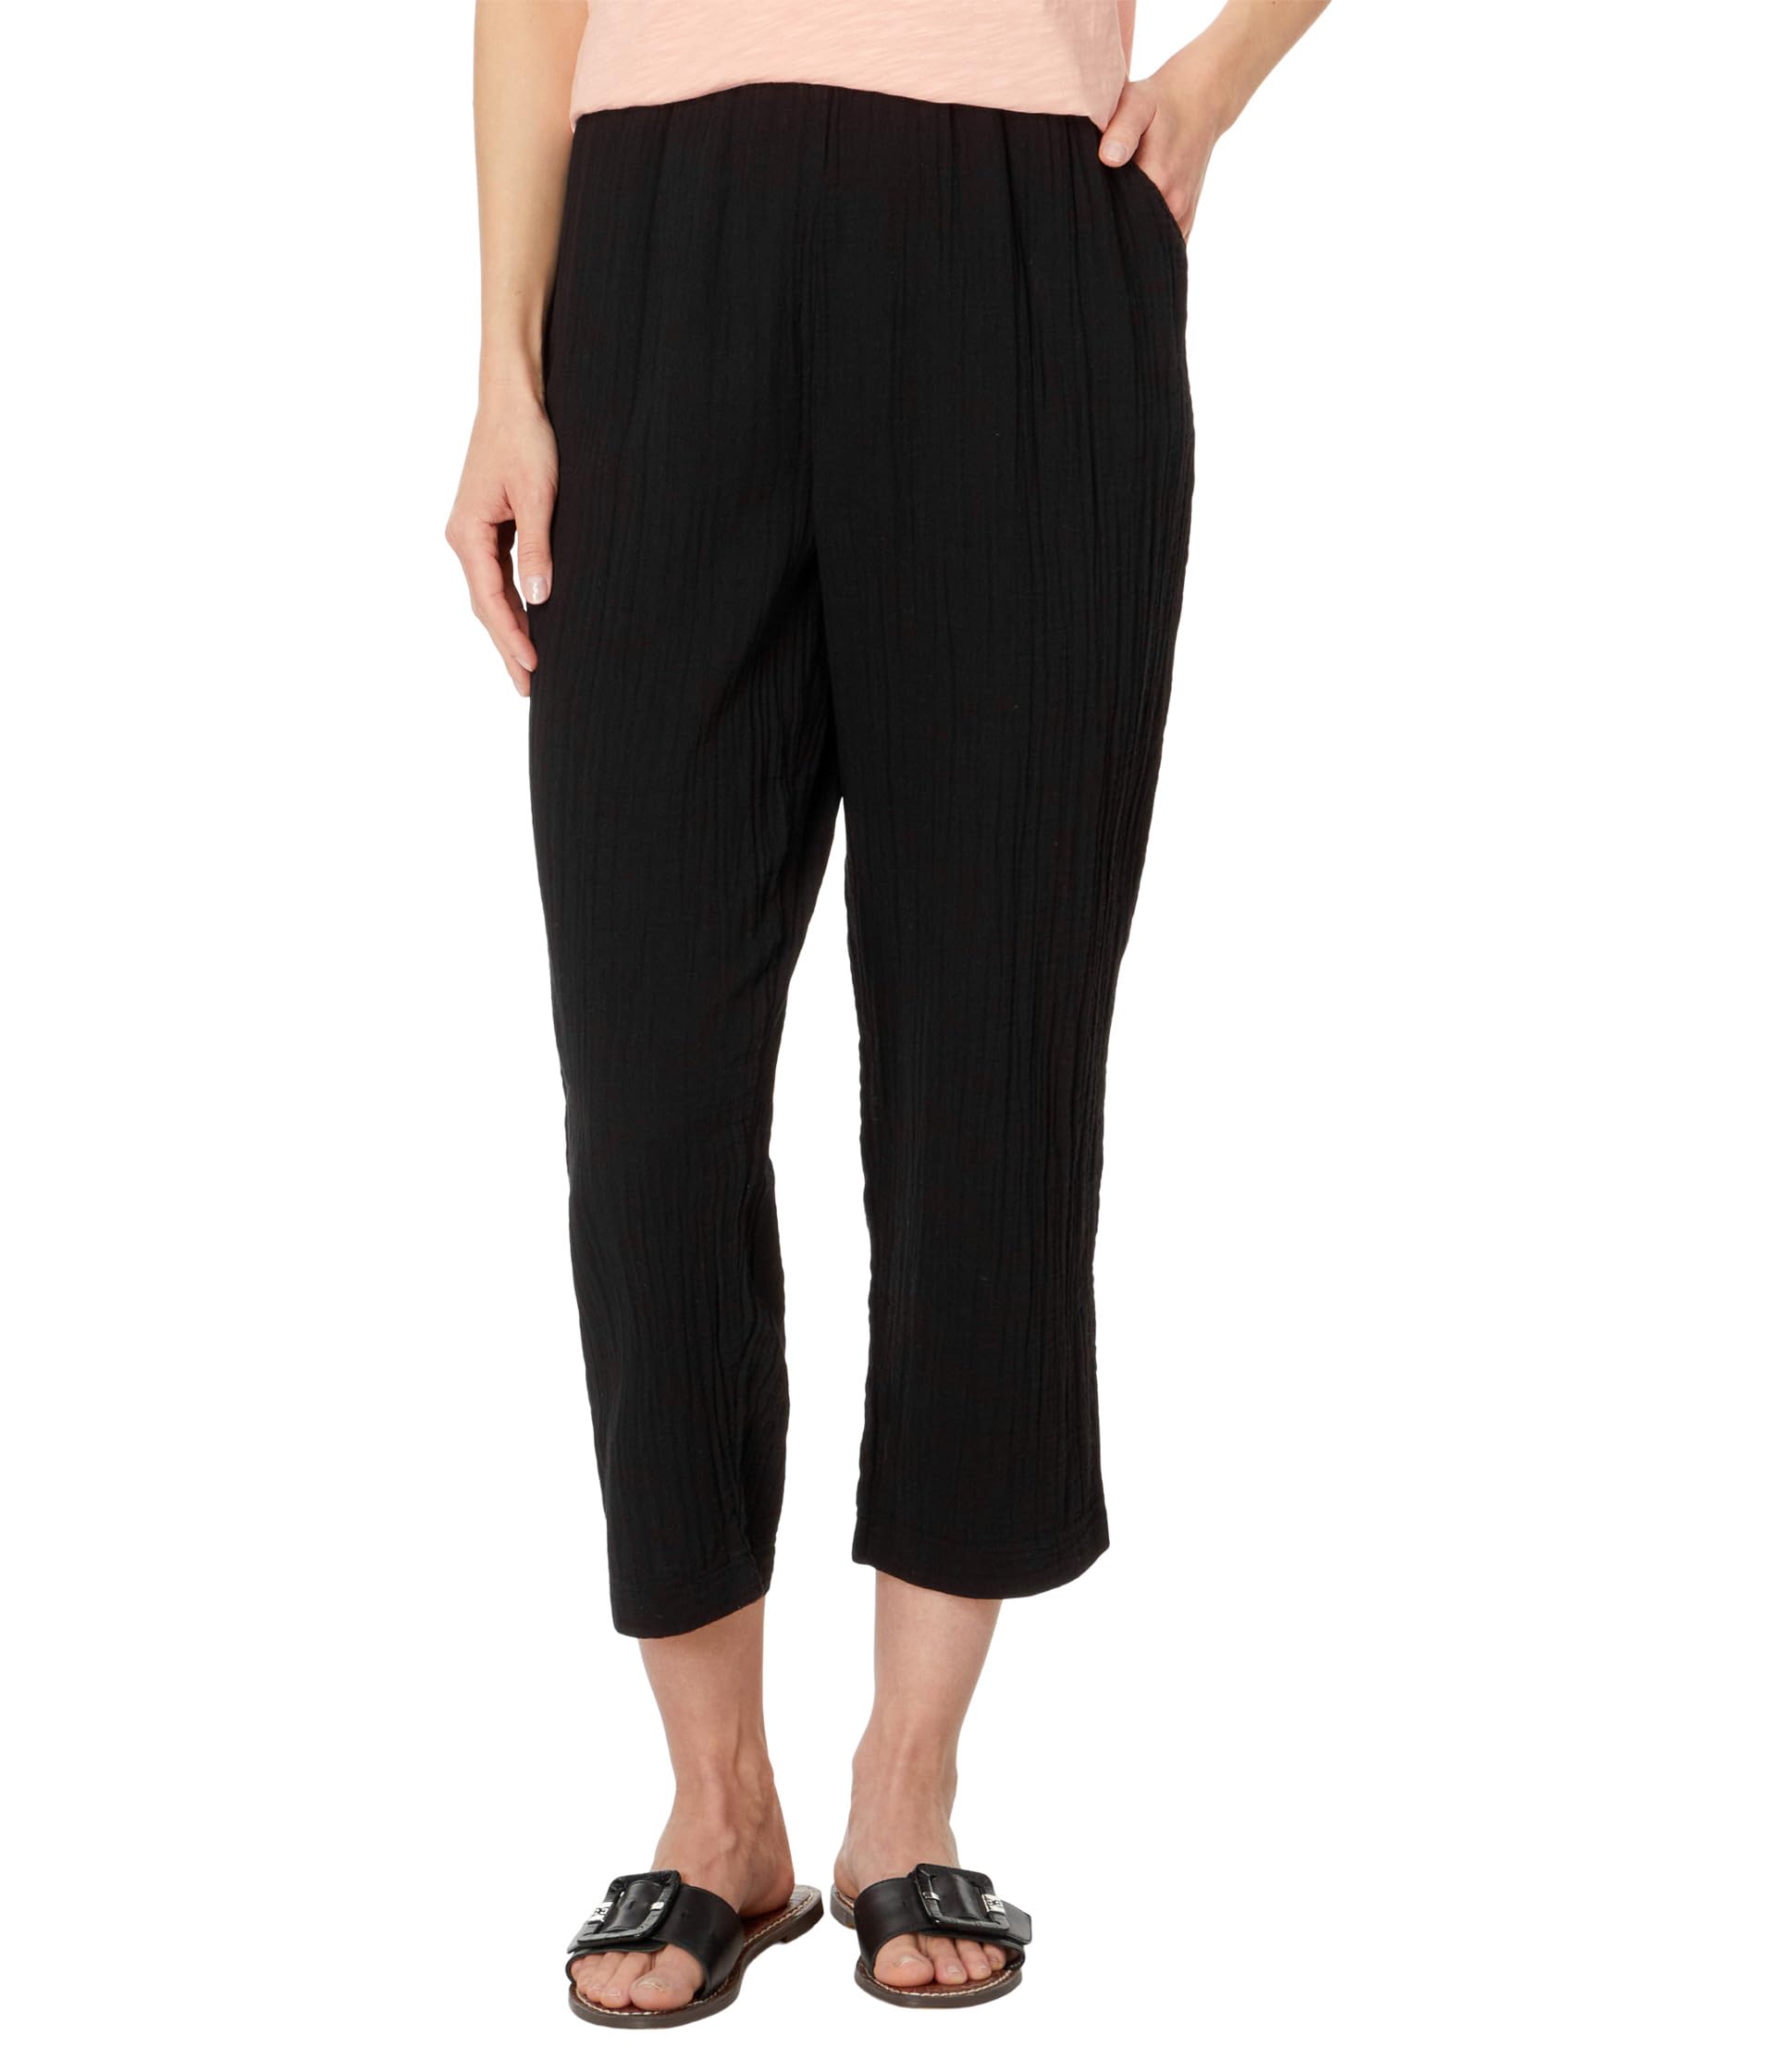 Easy Fit Cropped Trouser Mod-o-doc